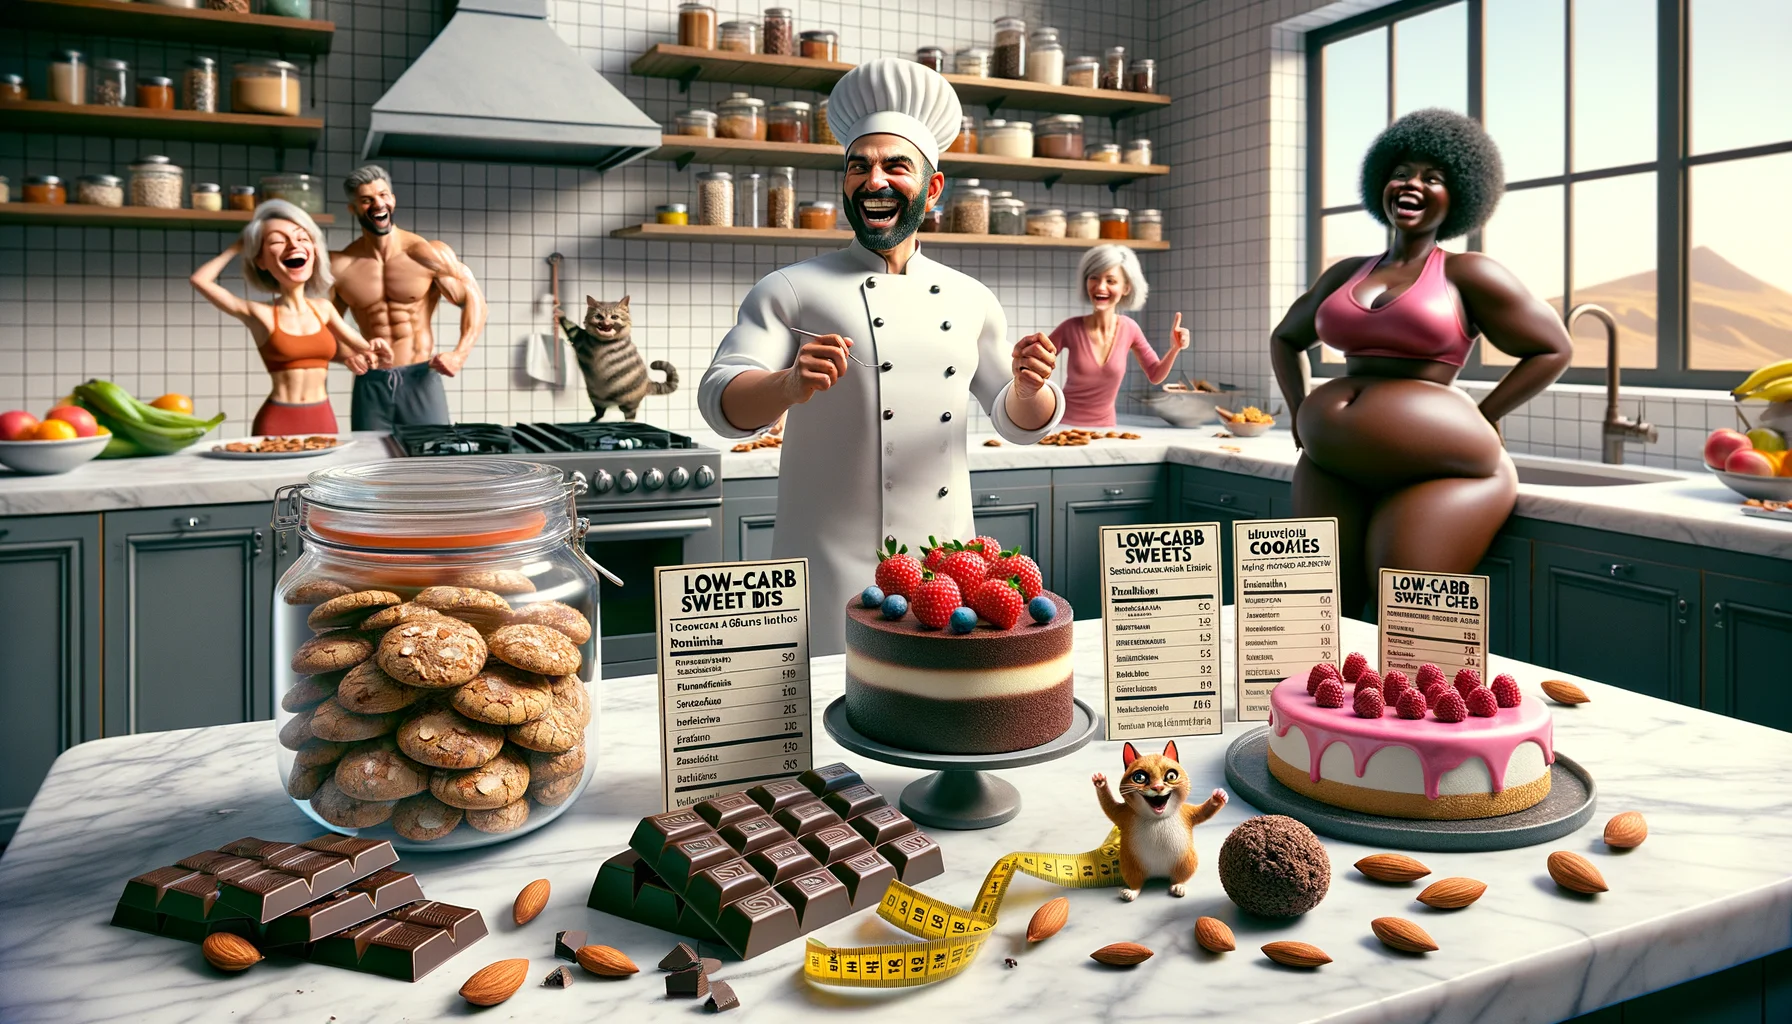 A humorous and realistic scene showcasing 'Low-Carb Sweets for Ketogenic Diets'. Imagine a pristine modern kitchen with spotless marble countertops. Laid out on one side, a selection of colorful low-carb sweets like dark chocolate bars, almond cookies, and raspberry cheesecake with nutritional details presented on small cards next to them. The kitchen is animated with diverse characters - a Middle-Eastern male chef in a traditional chef's hat, laughing as he adds the finishing touches to a sugar-free dessert, and a Black female fitness trainer standing with a tape measure around her waist, her face filled with happy surprise as she eyes the delicious treats. In a corner, a chubby cat is trying to nudge open a jar of low-carb cookies, adding to the hilarity of the scene.